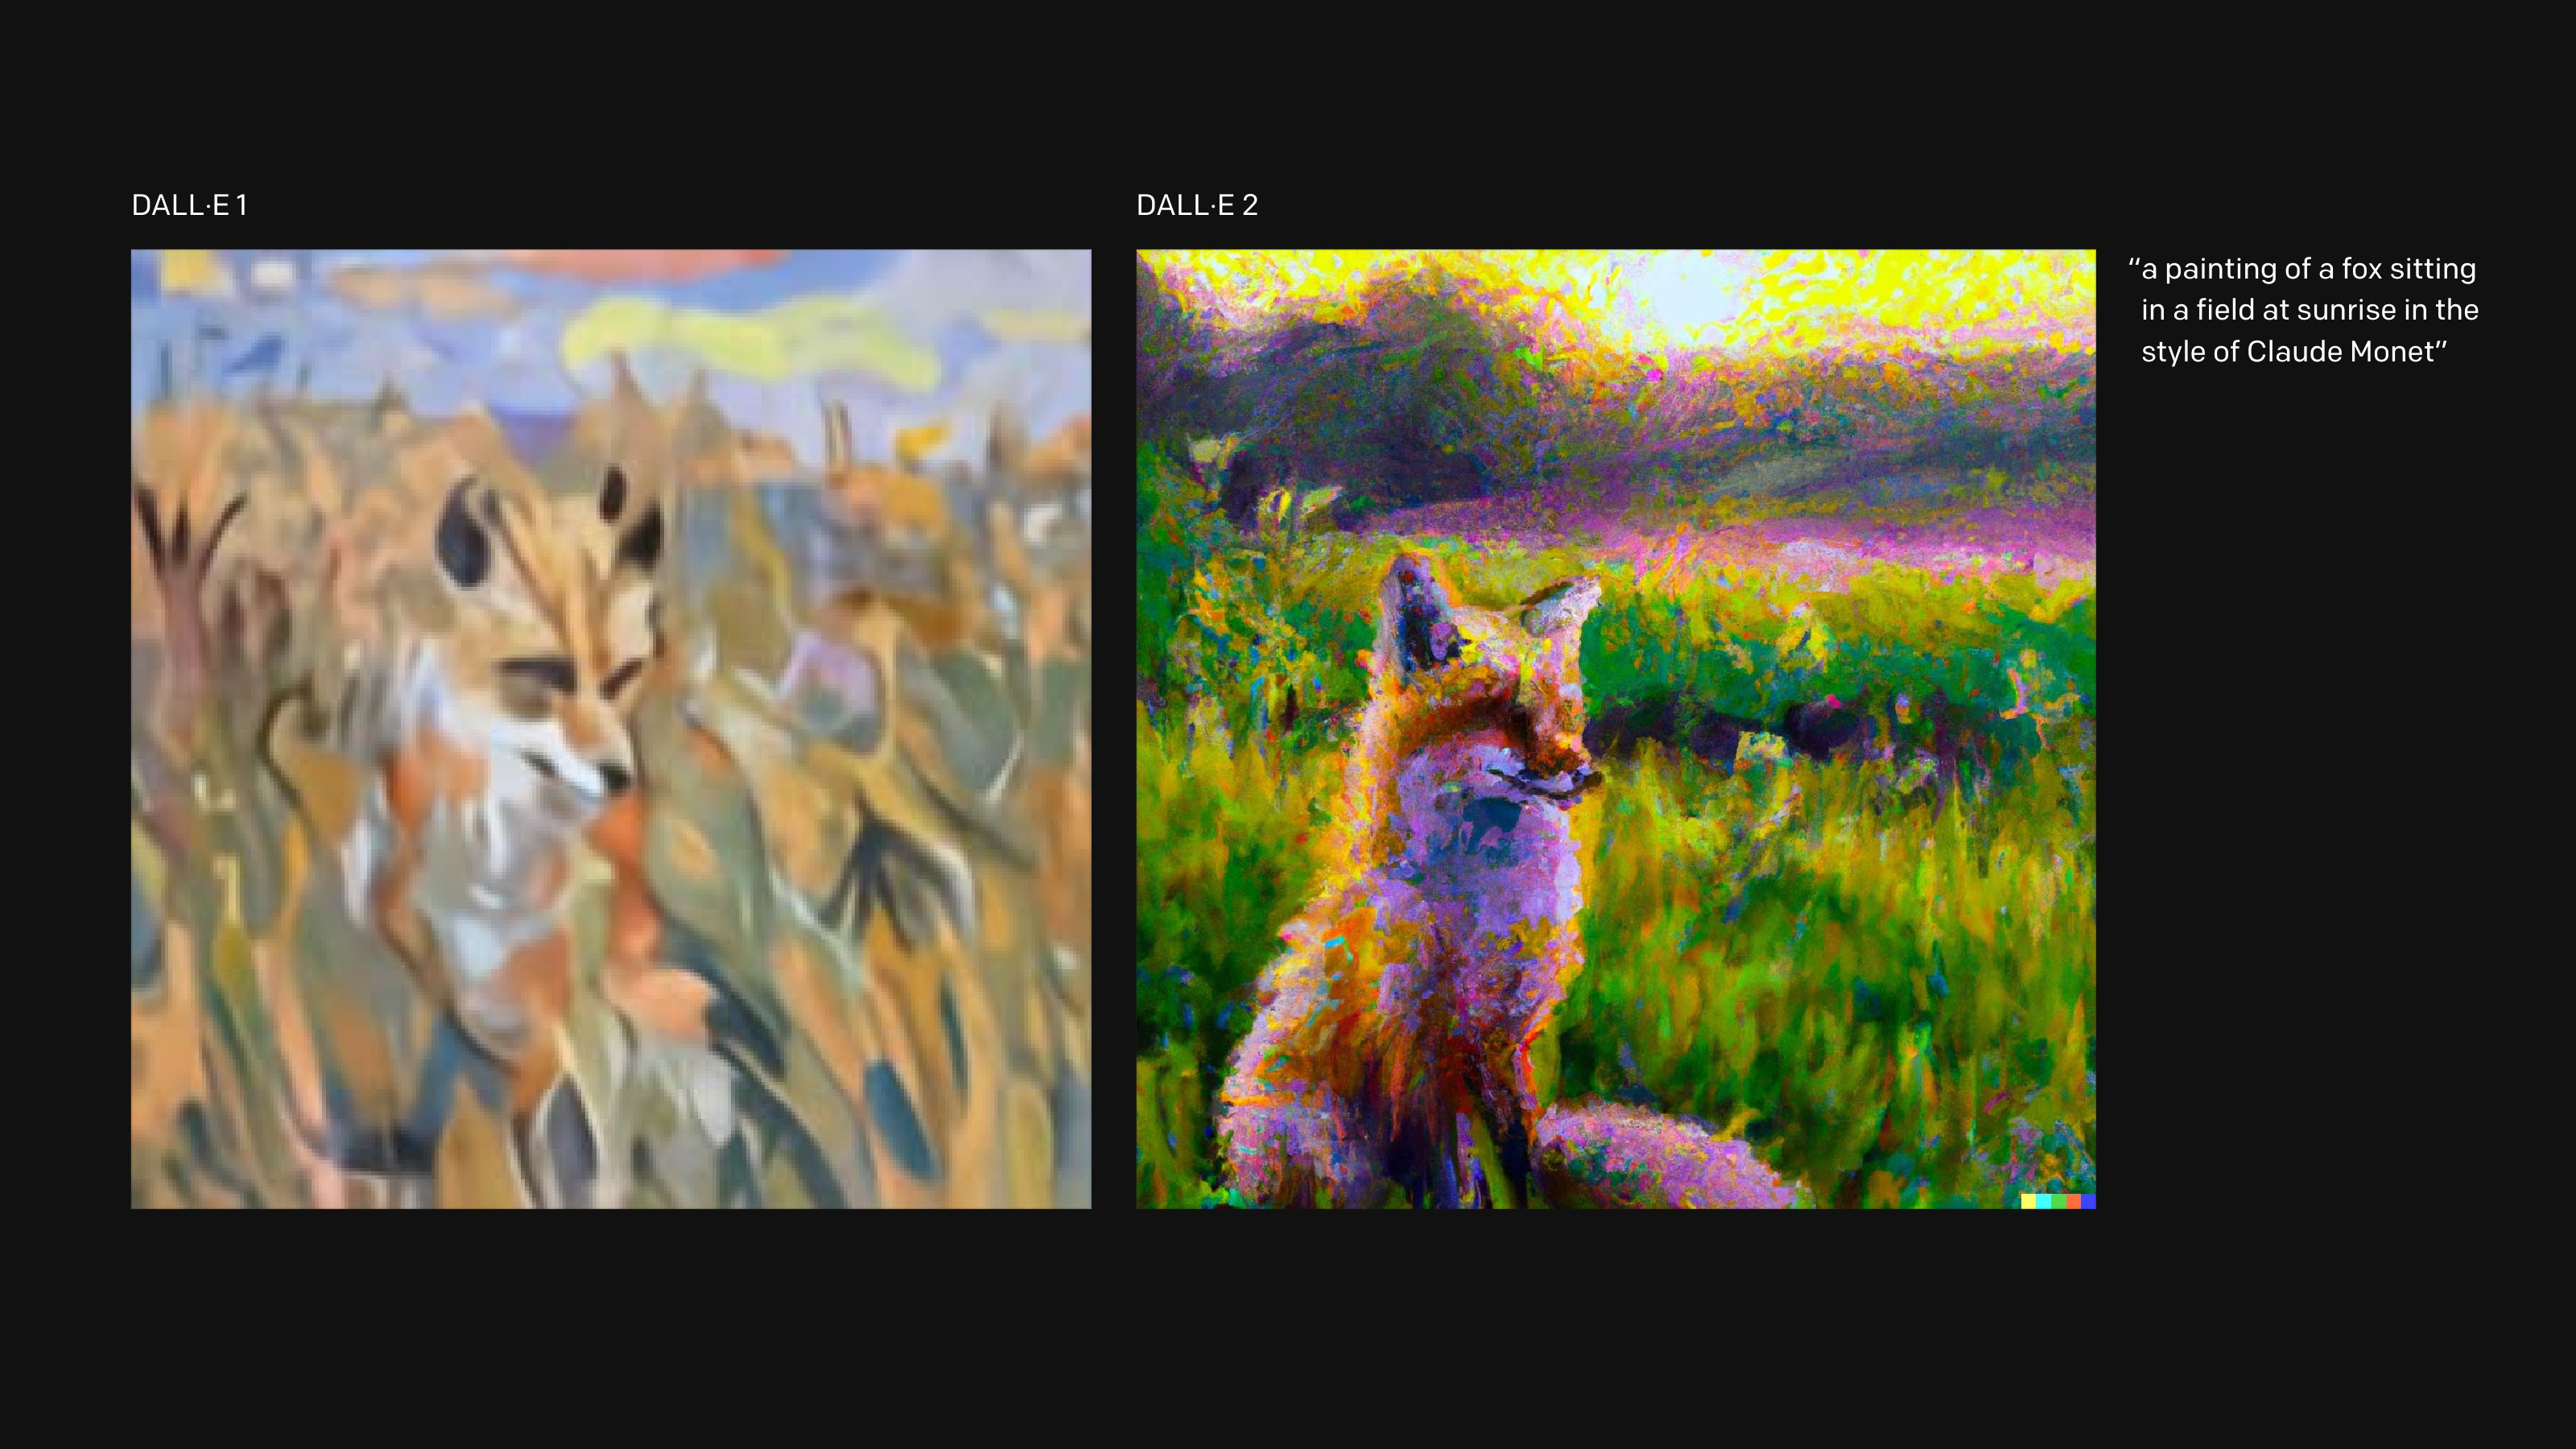 Pictures of foxes generated by Dall-E